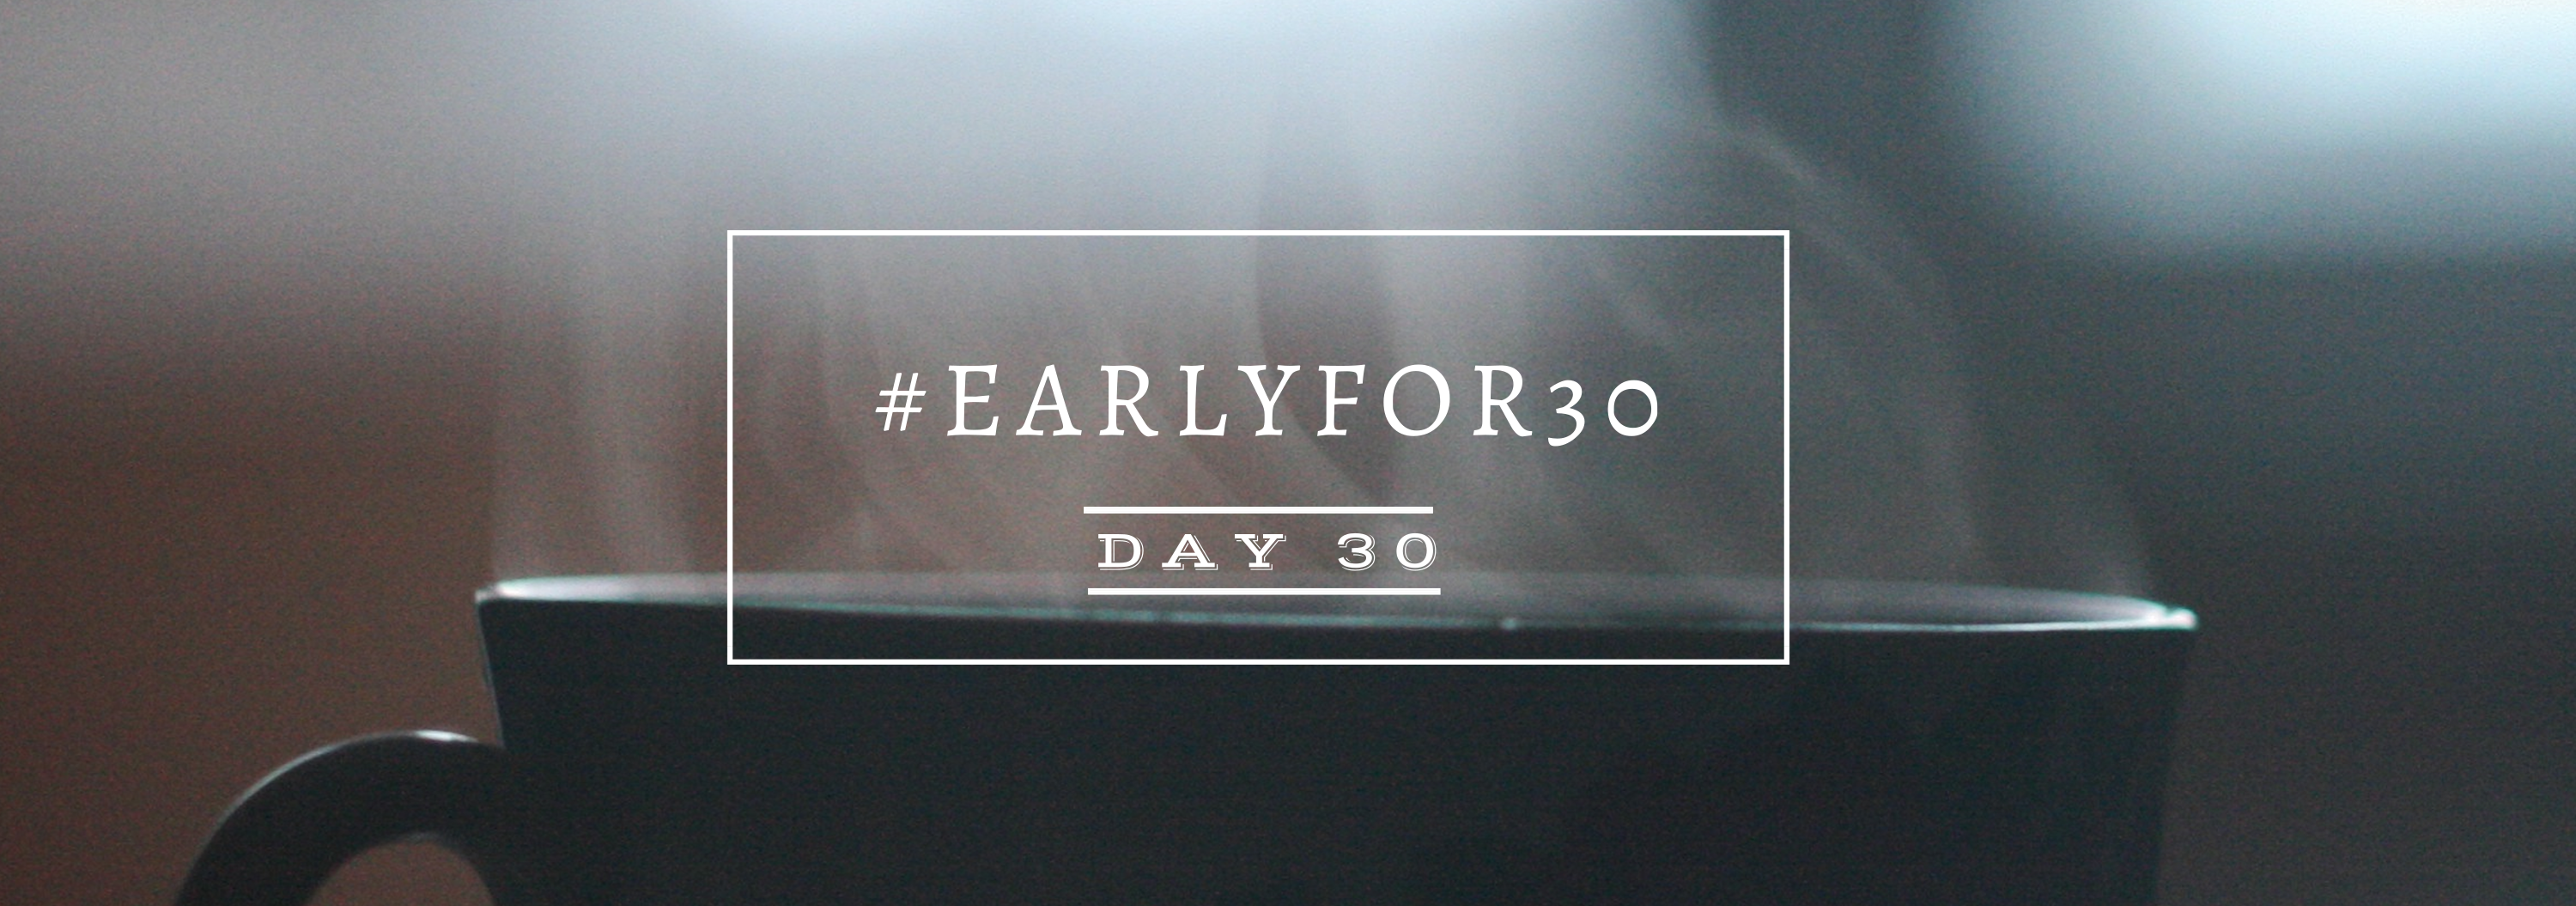 Day 30 Early for 30 Days Challenge